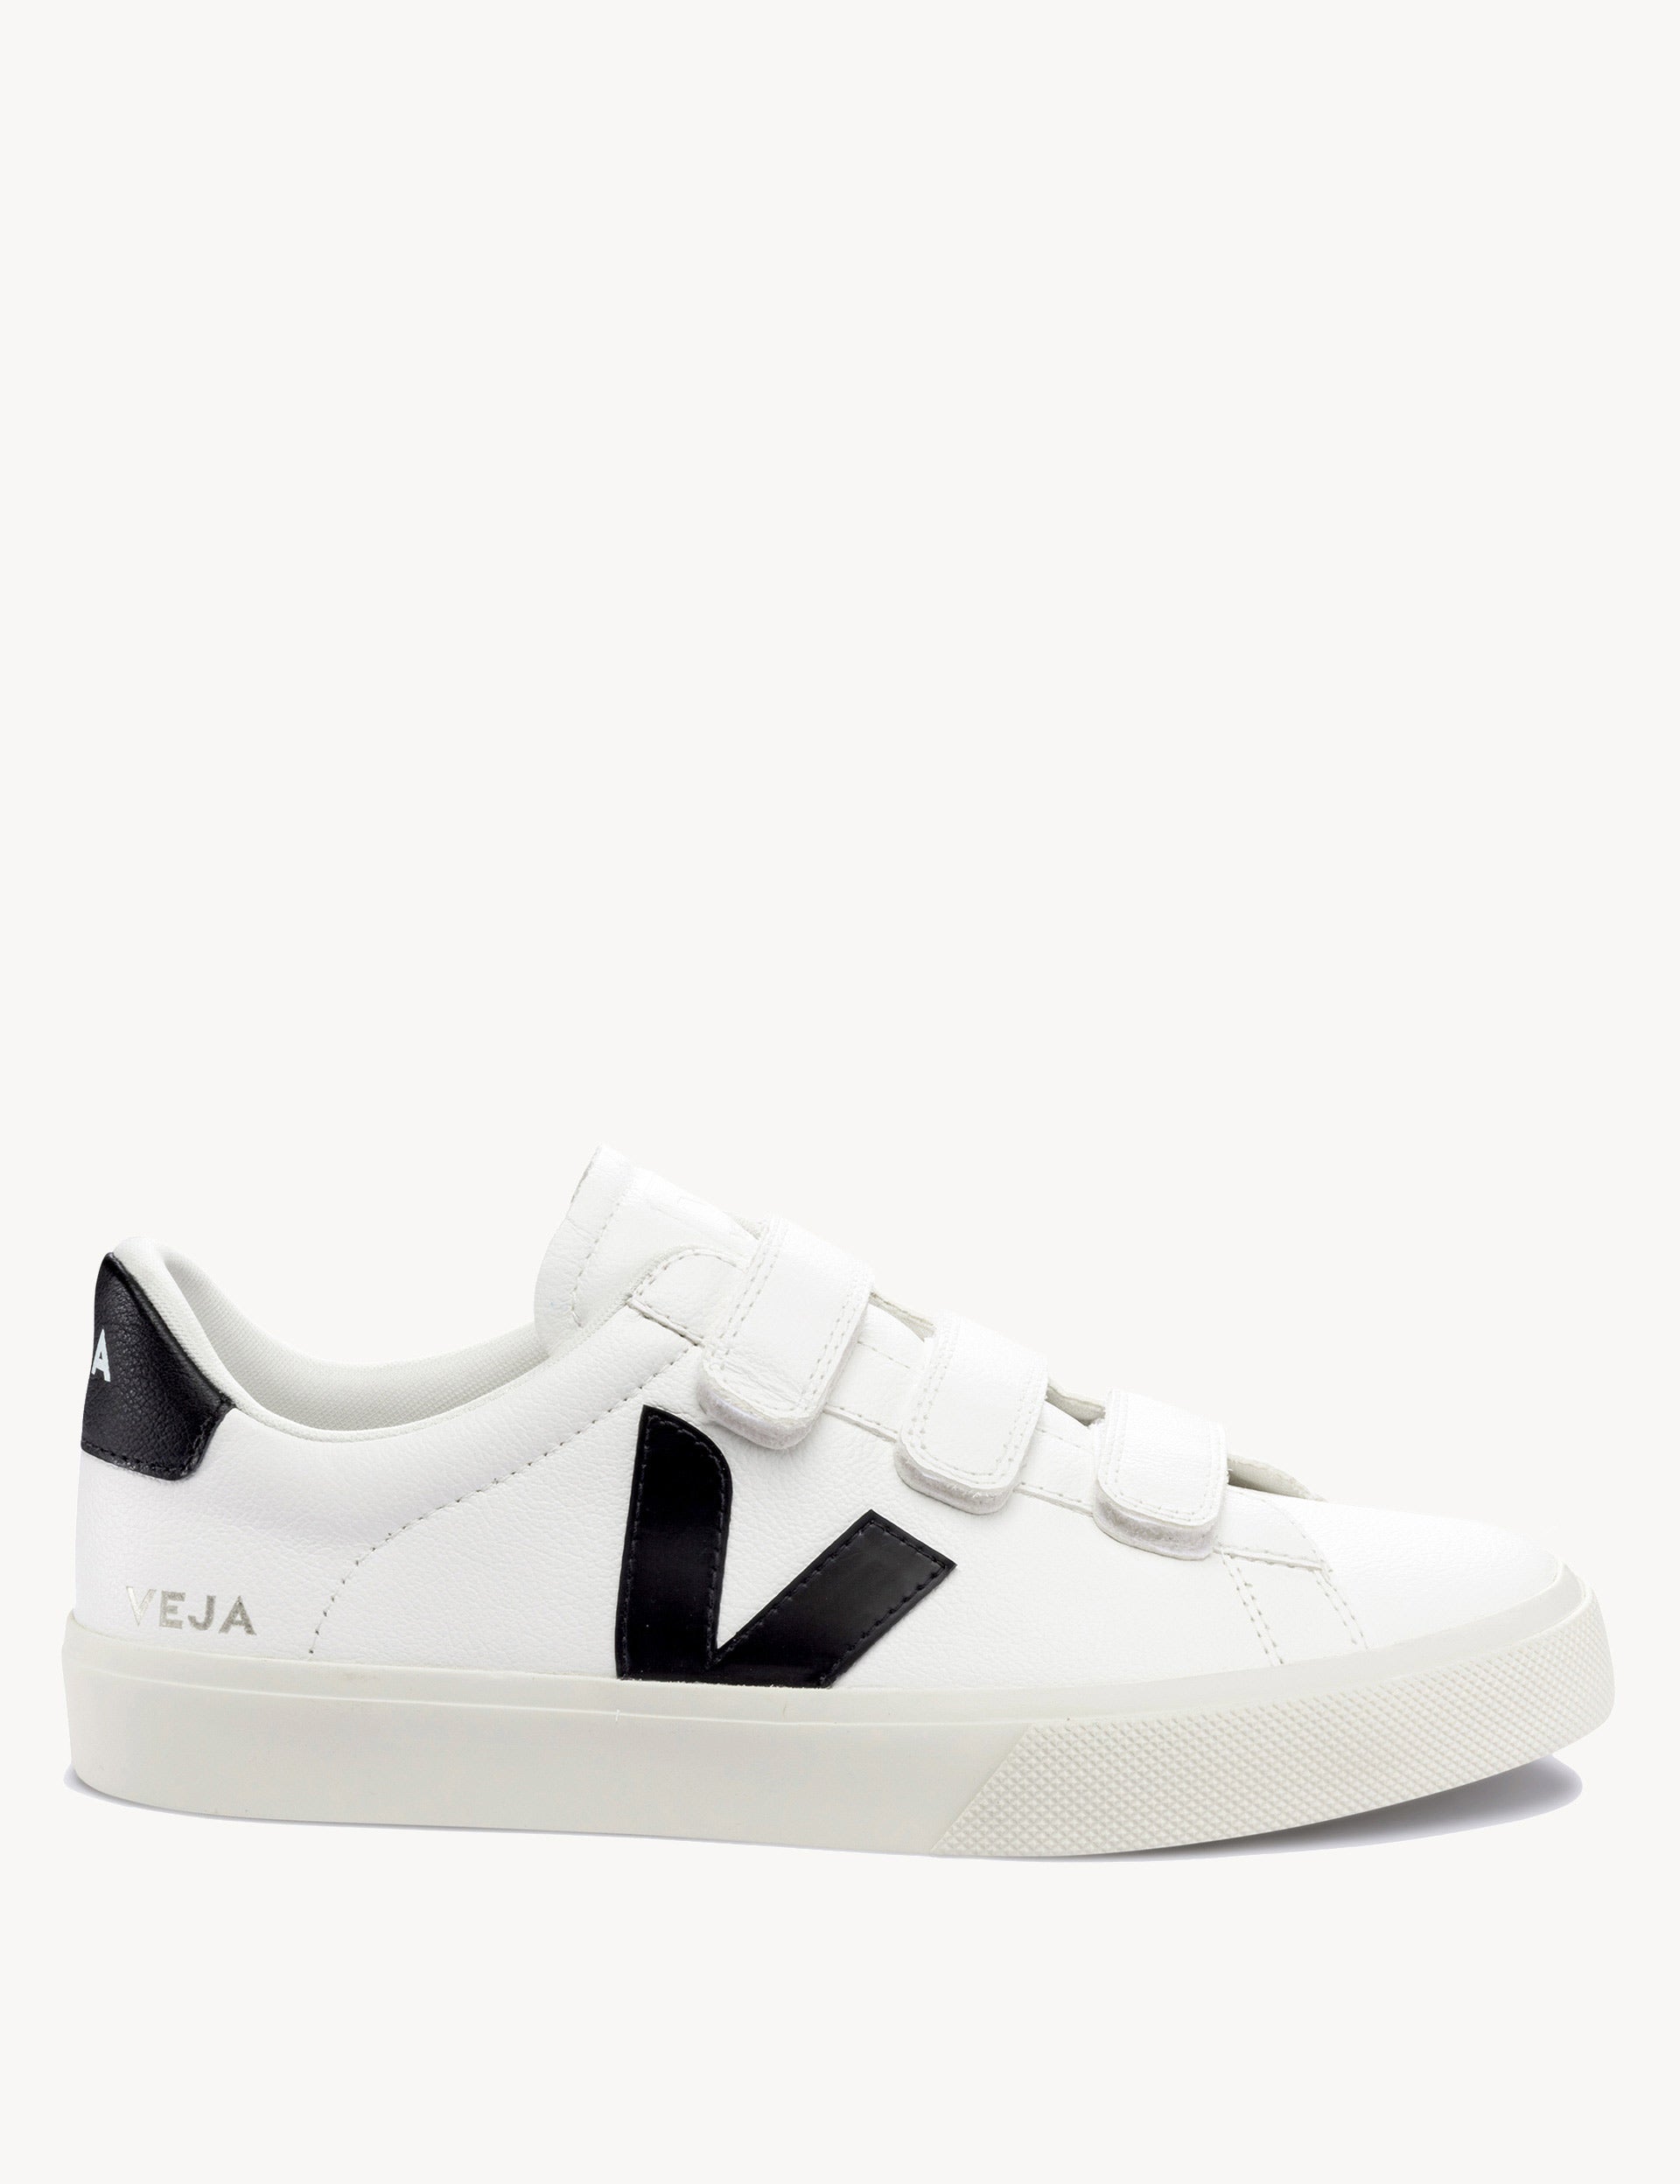 Veja | Recife Leather Trainers - White Black | The Sports Edit